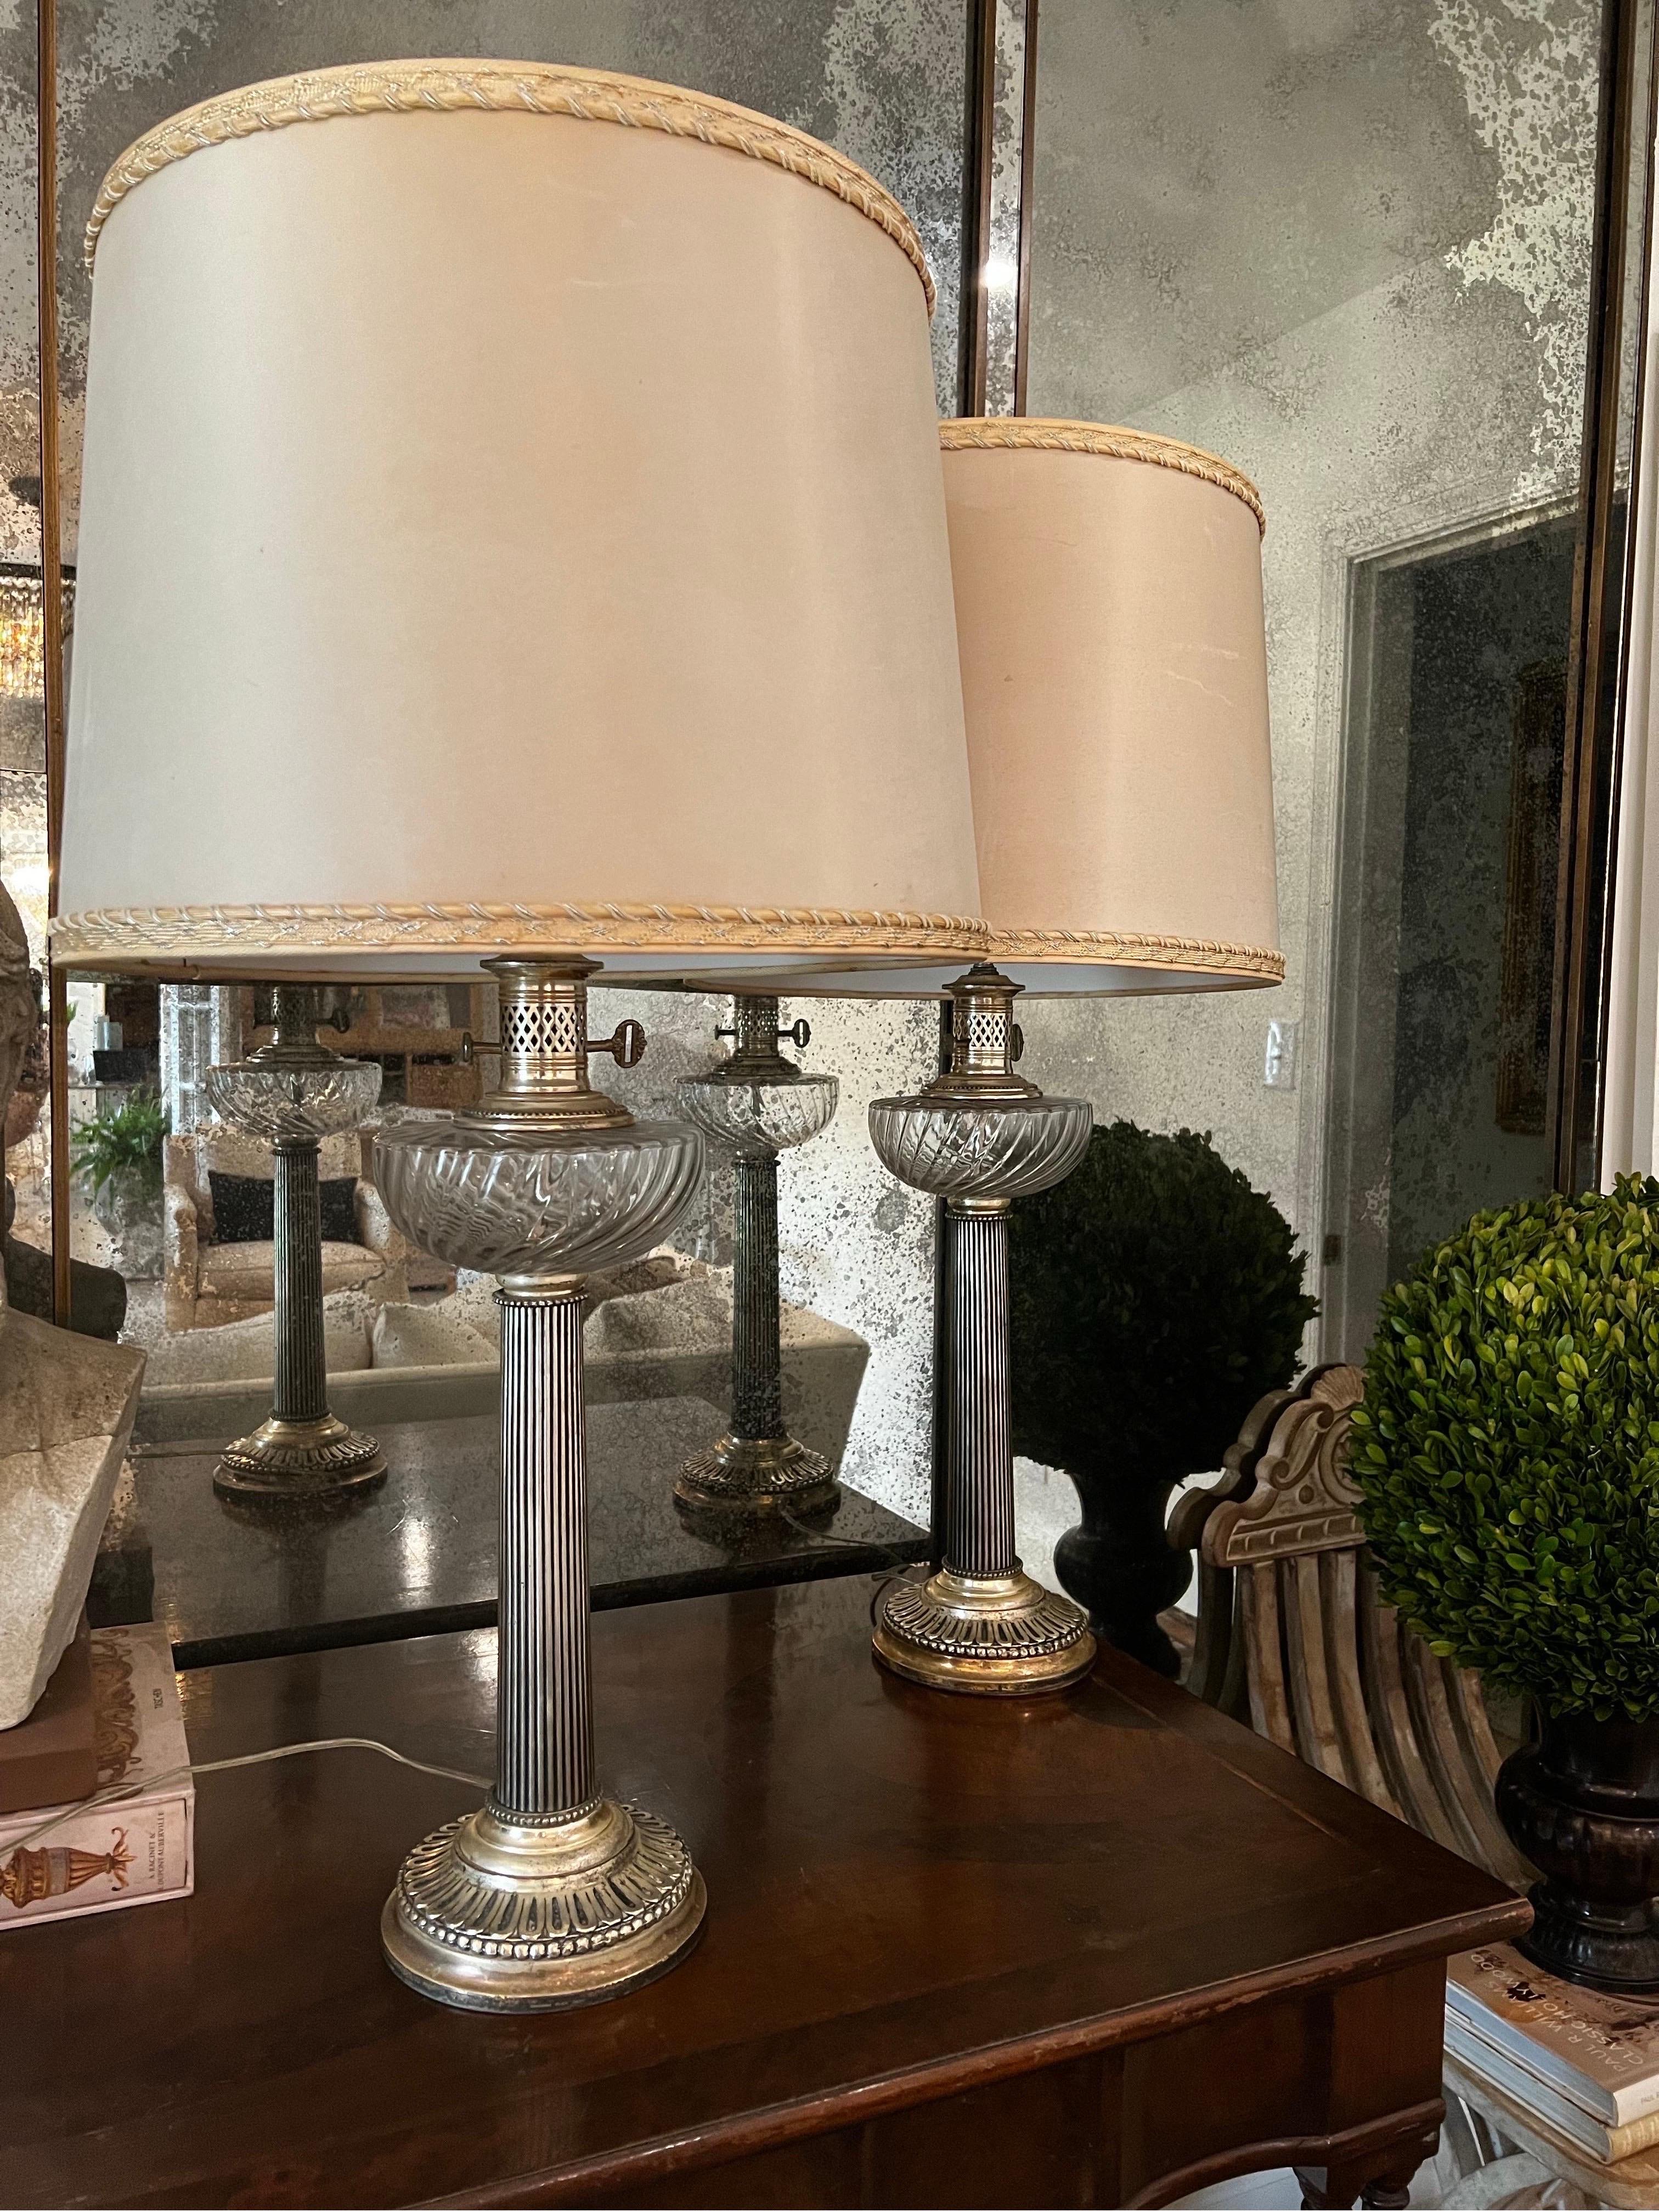 Please note lamp shades NOT included. 

Pair of Antique silver plated table lamps.  Originally oil lamps converted to electric/plug in.
